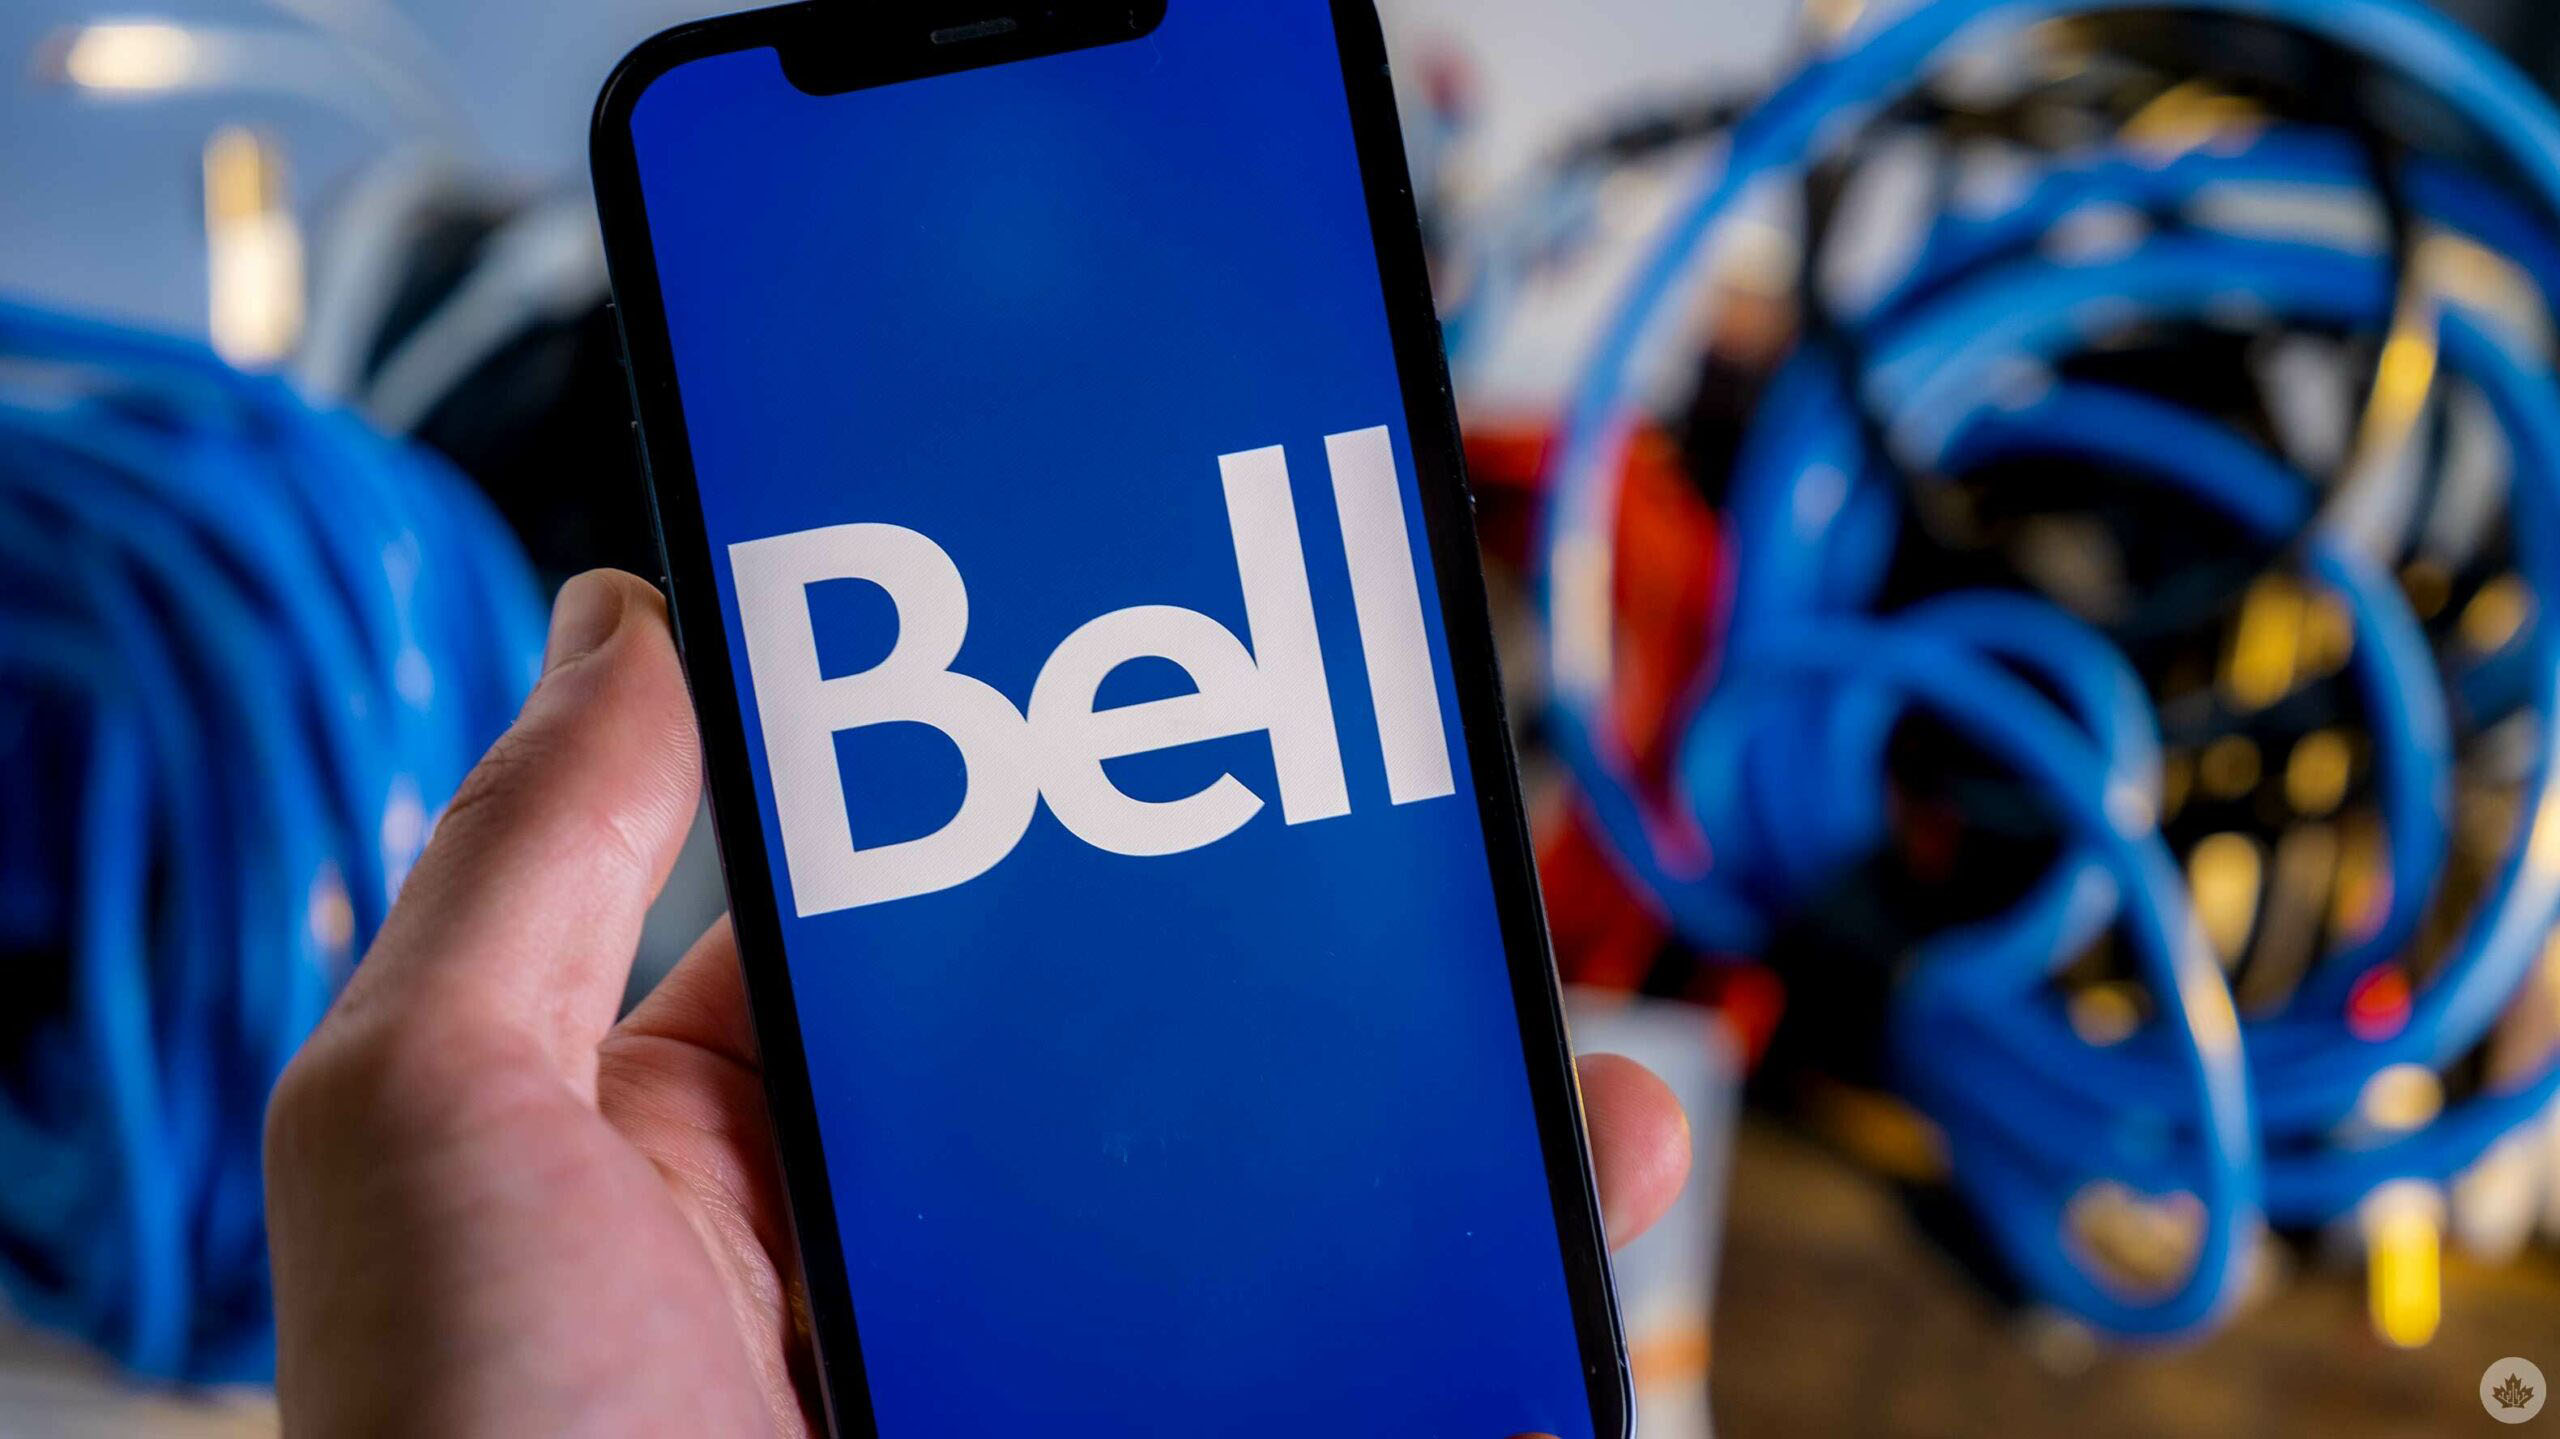 Bell refreshes MyBell app with improved navigation, new home screen and more